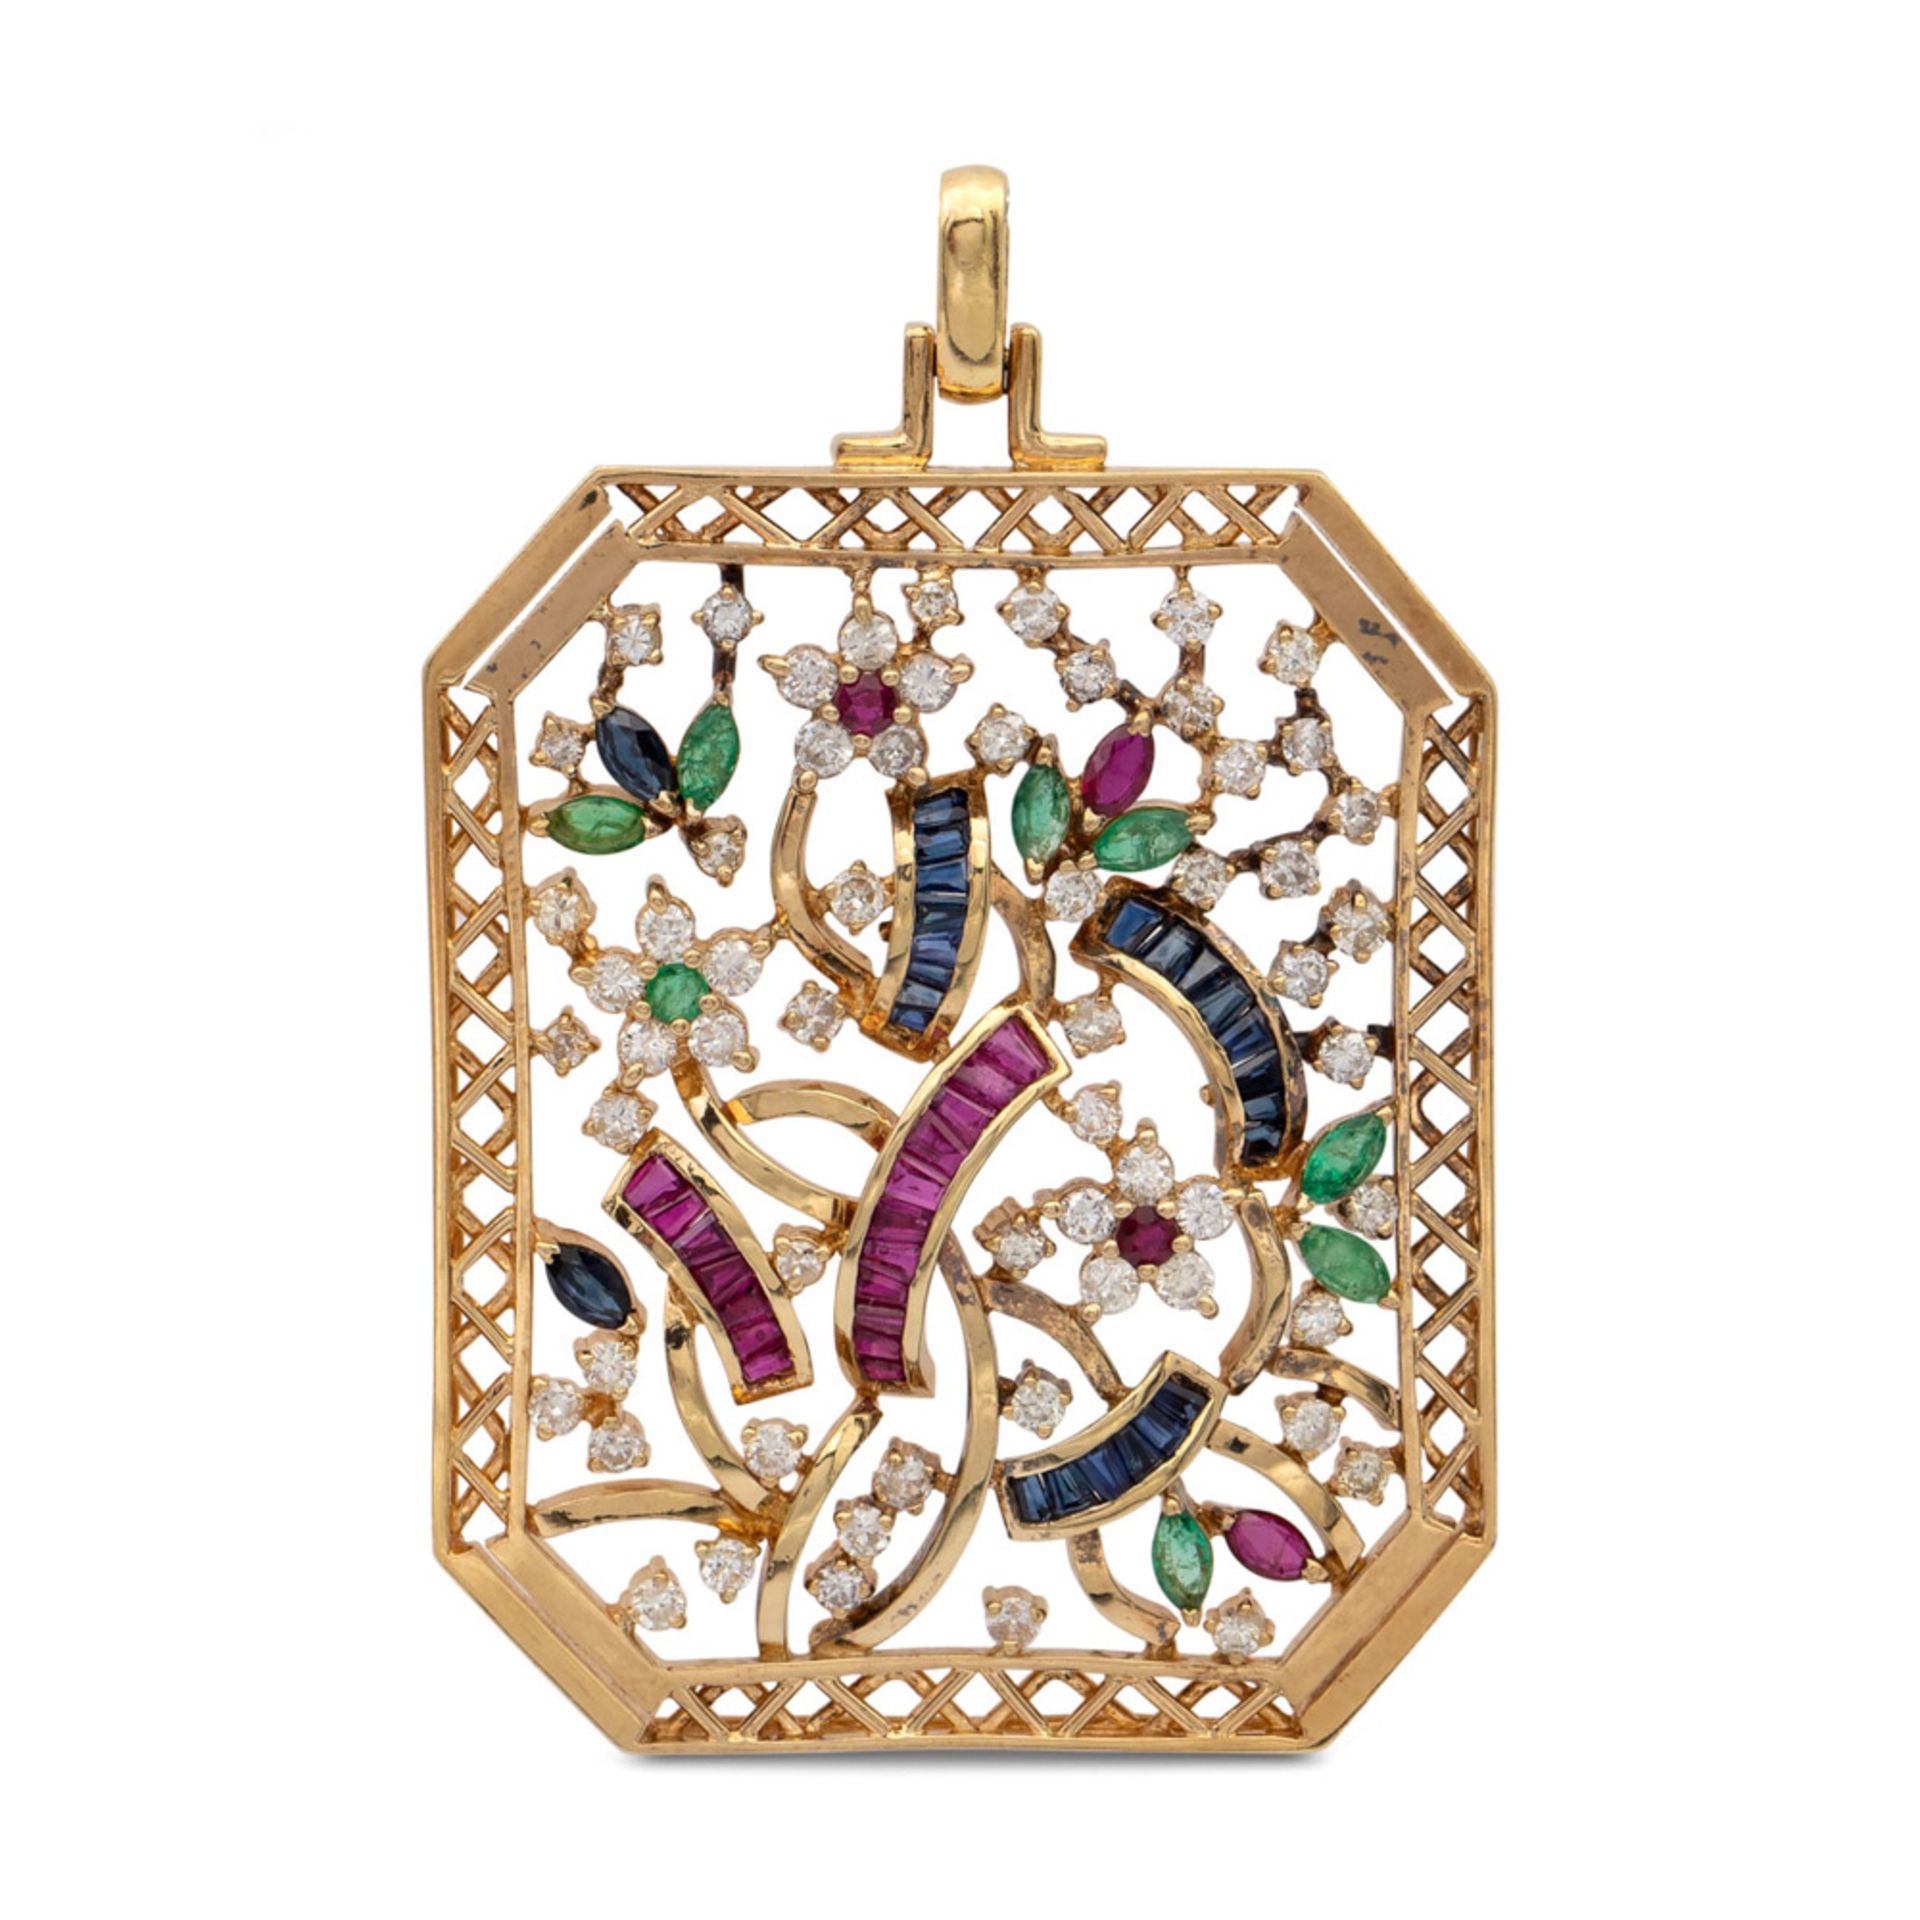 18kt yellow gold and precious stones floral pattern pendant weight 20,7 gr.